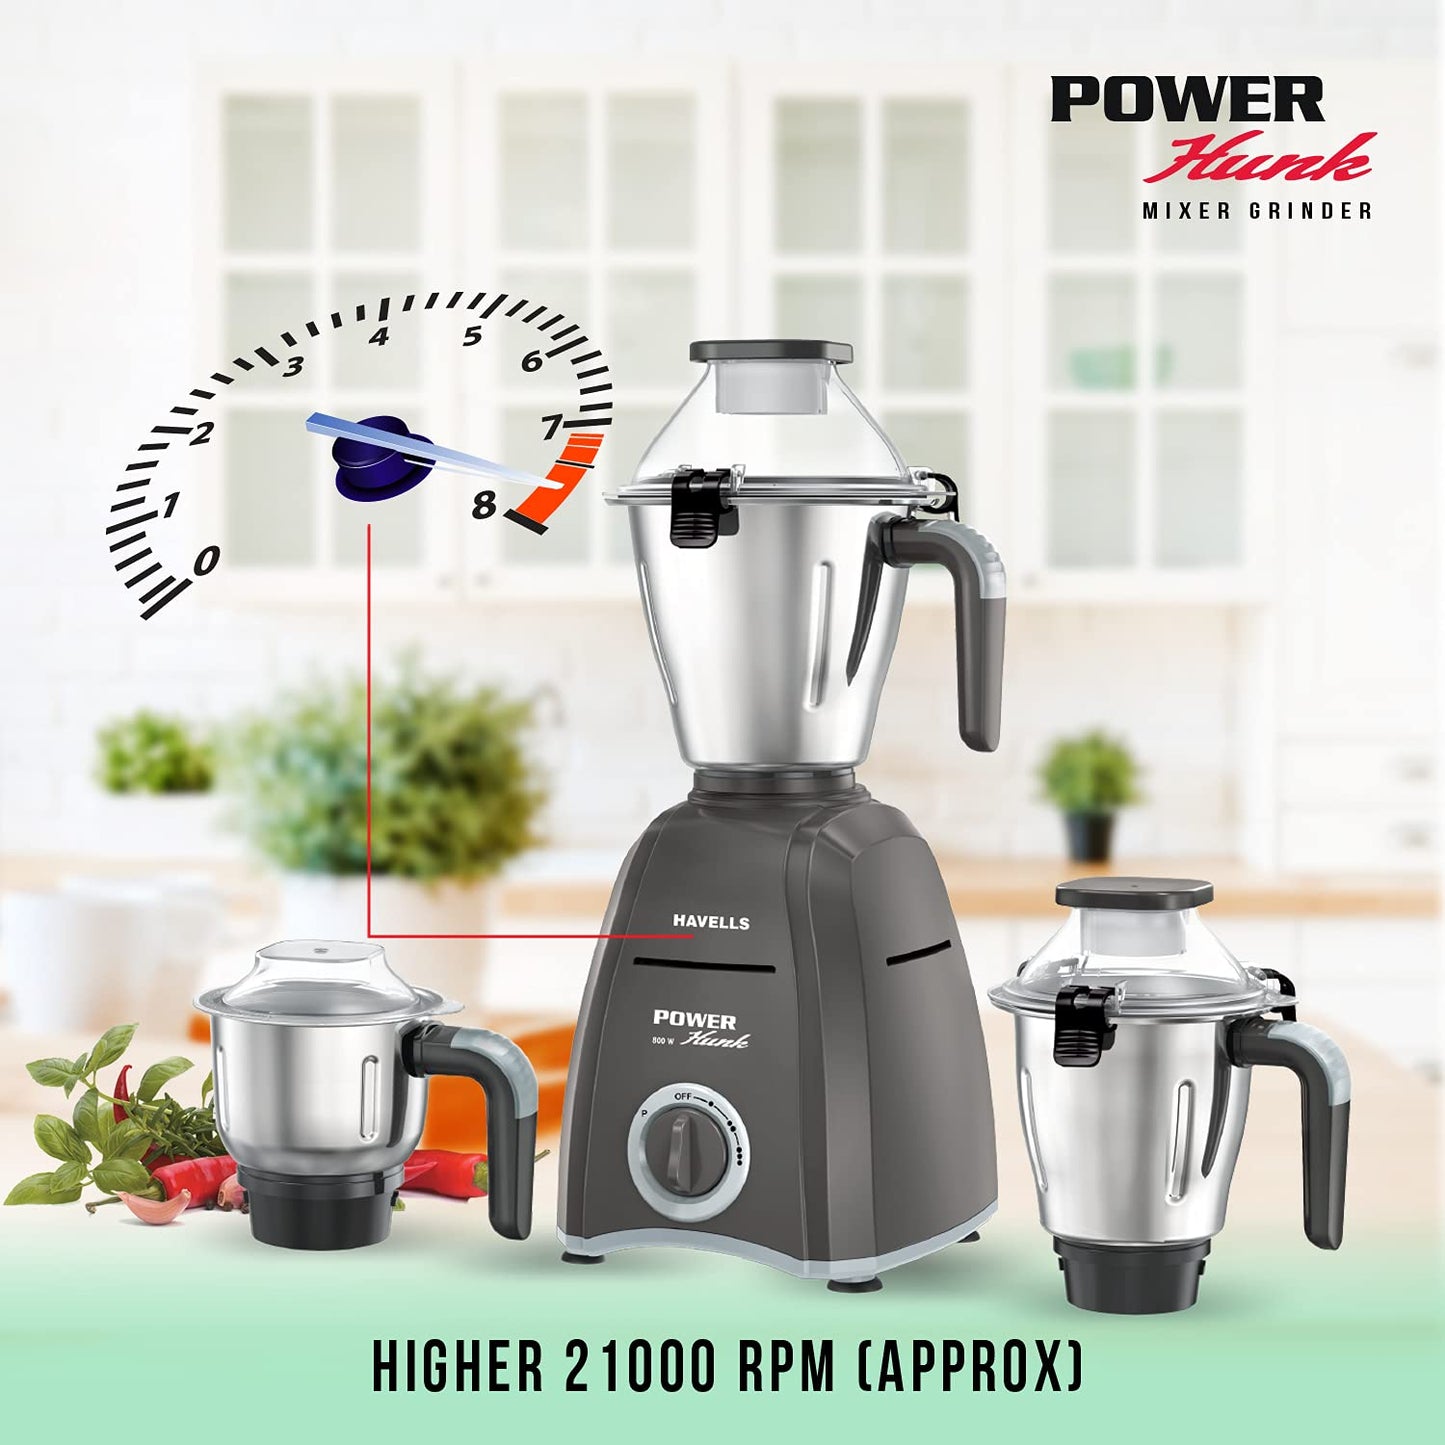 Havells Power Hunk 800 watt Mixer Grinder with 3 Wider mouth Stainless Steel Jar, Hands Free operation, SS-304 Grade Blade & 7 year motor warranty (Grey)